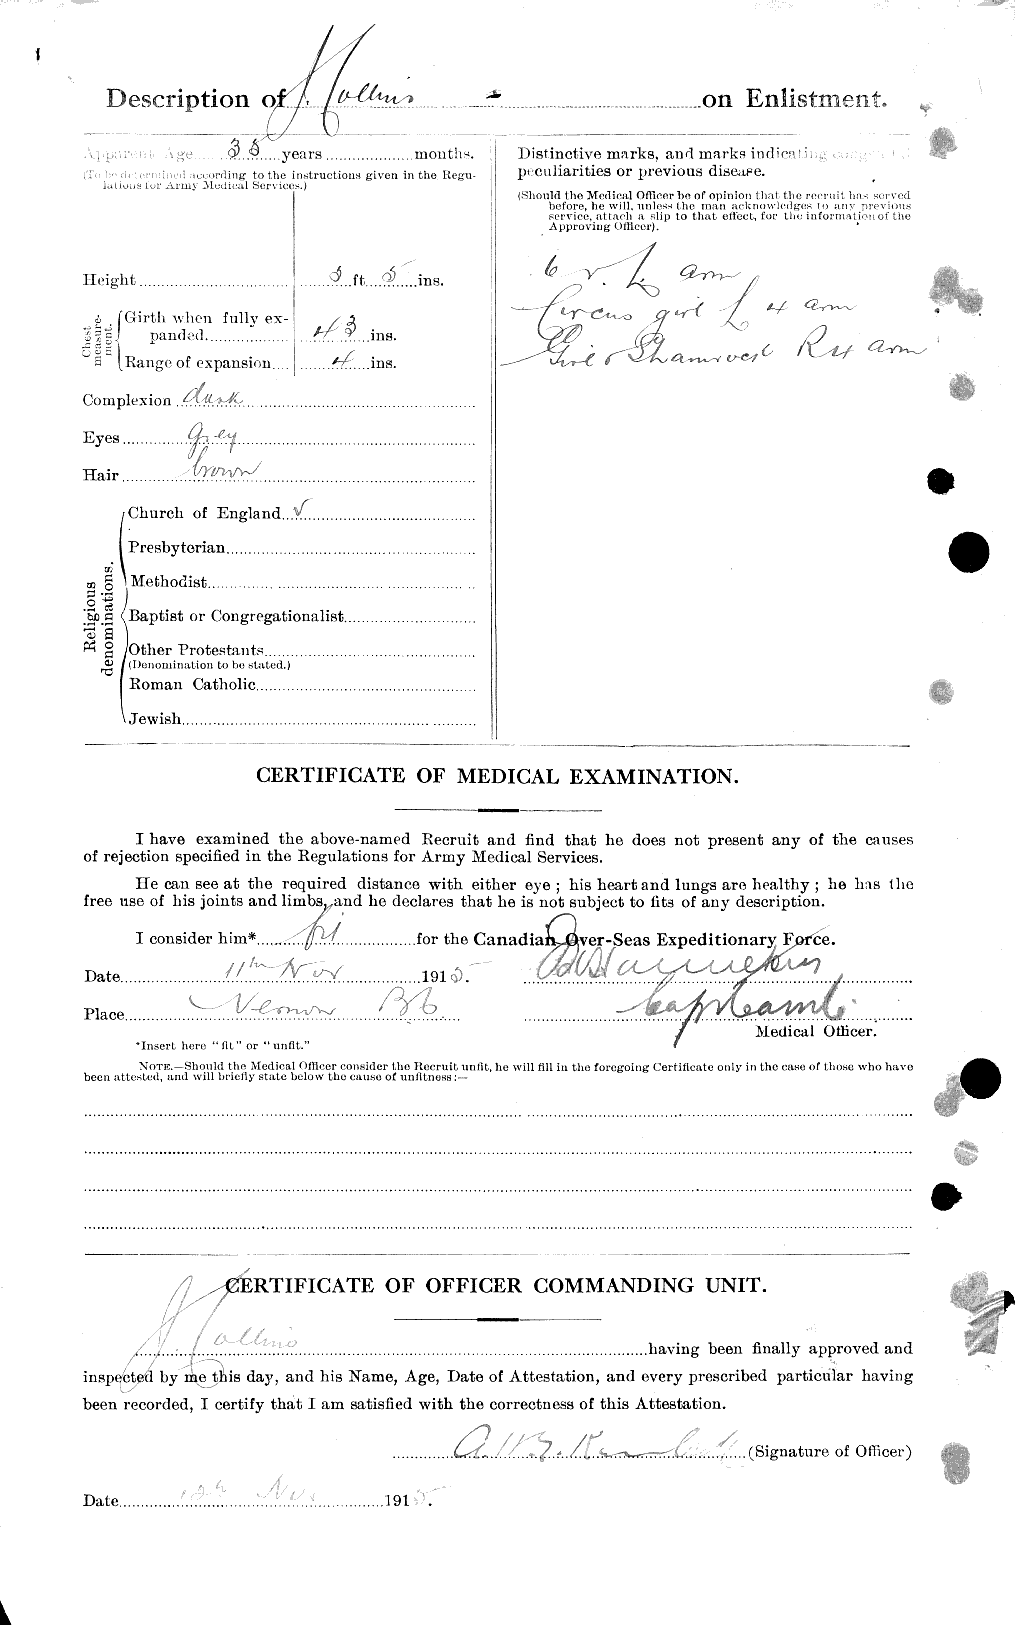 Personnel Records of the First World War - CEF 037980b